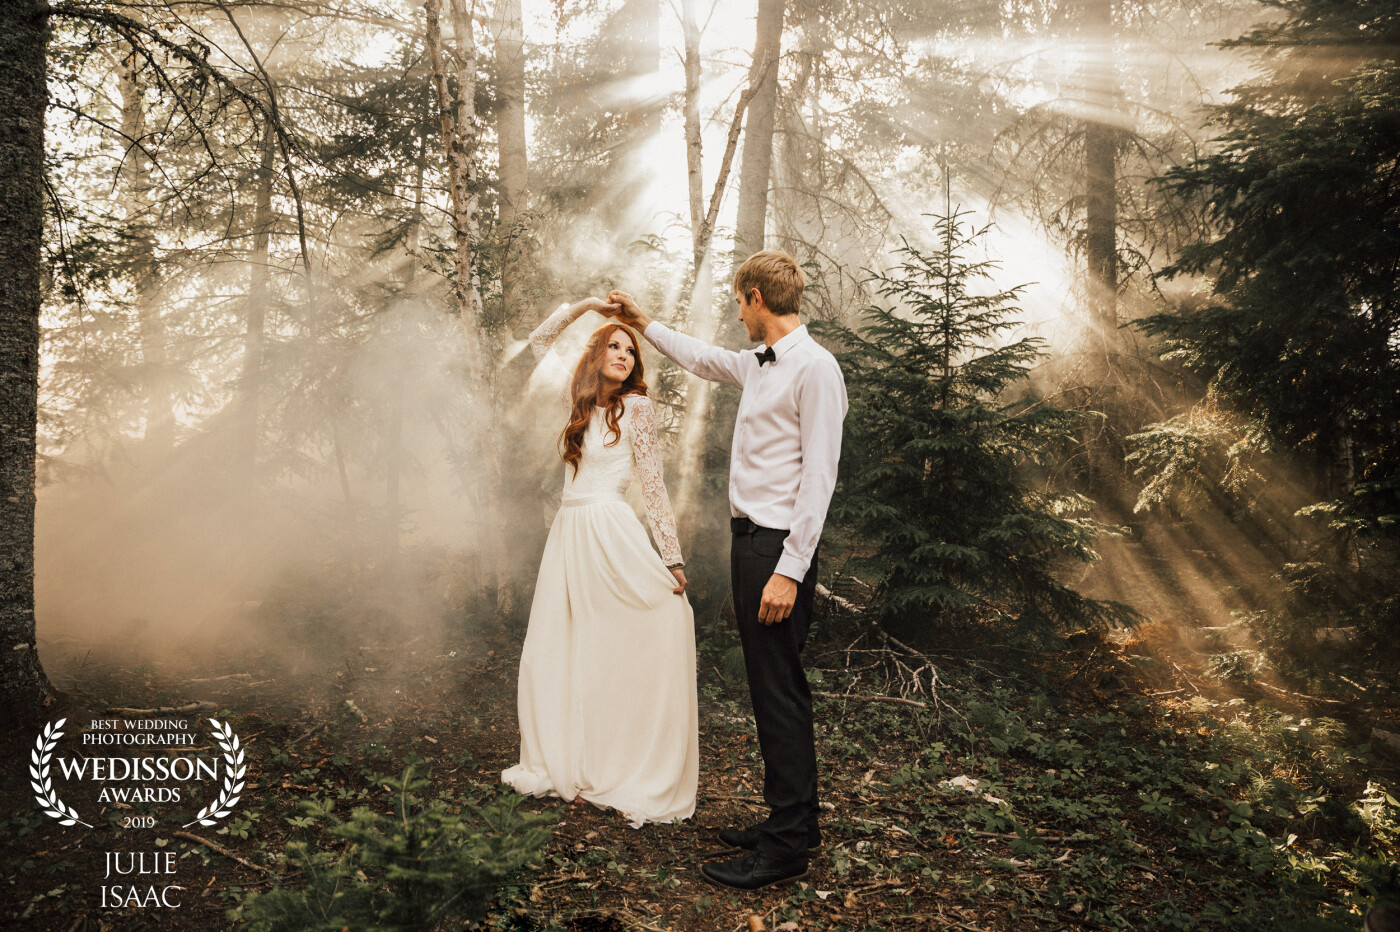 We photographed this couple nestled within the gorgeous forest surrounding Elk Ridge Resort, SK. We wanted to create a magical fairytale atmosphere for their first dance. As the sun slowly lowered in the sky, its rays were gently captured by the smokey haze hanging in the trees, adding to the romantic feeling in the air. 